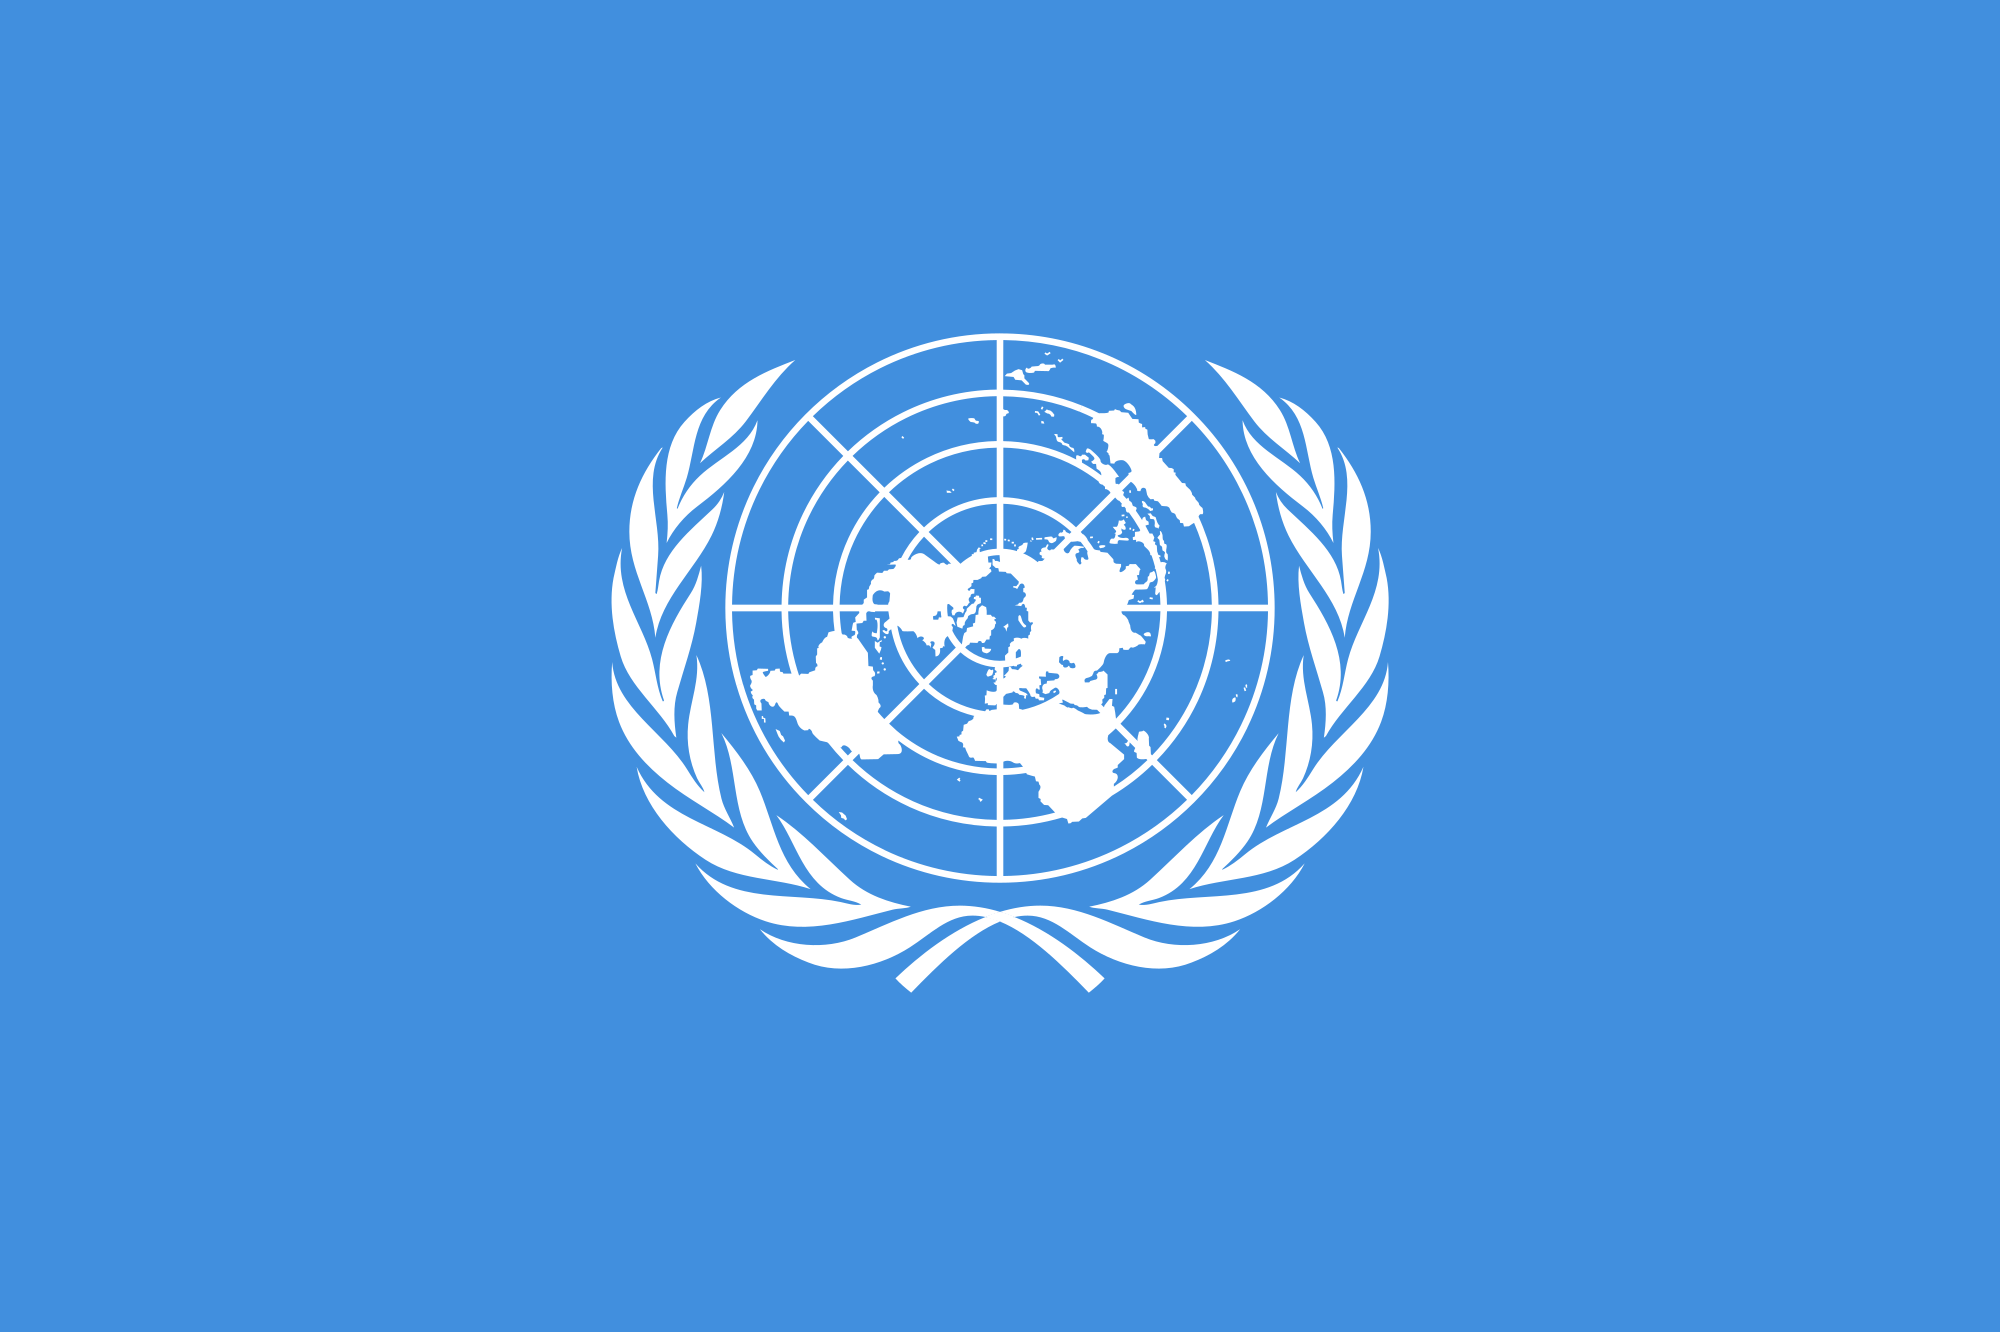 Blue Radar with Wheat Logo - Flag of the United Nations